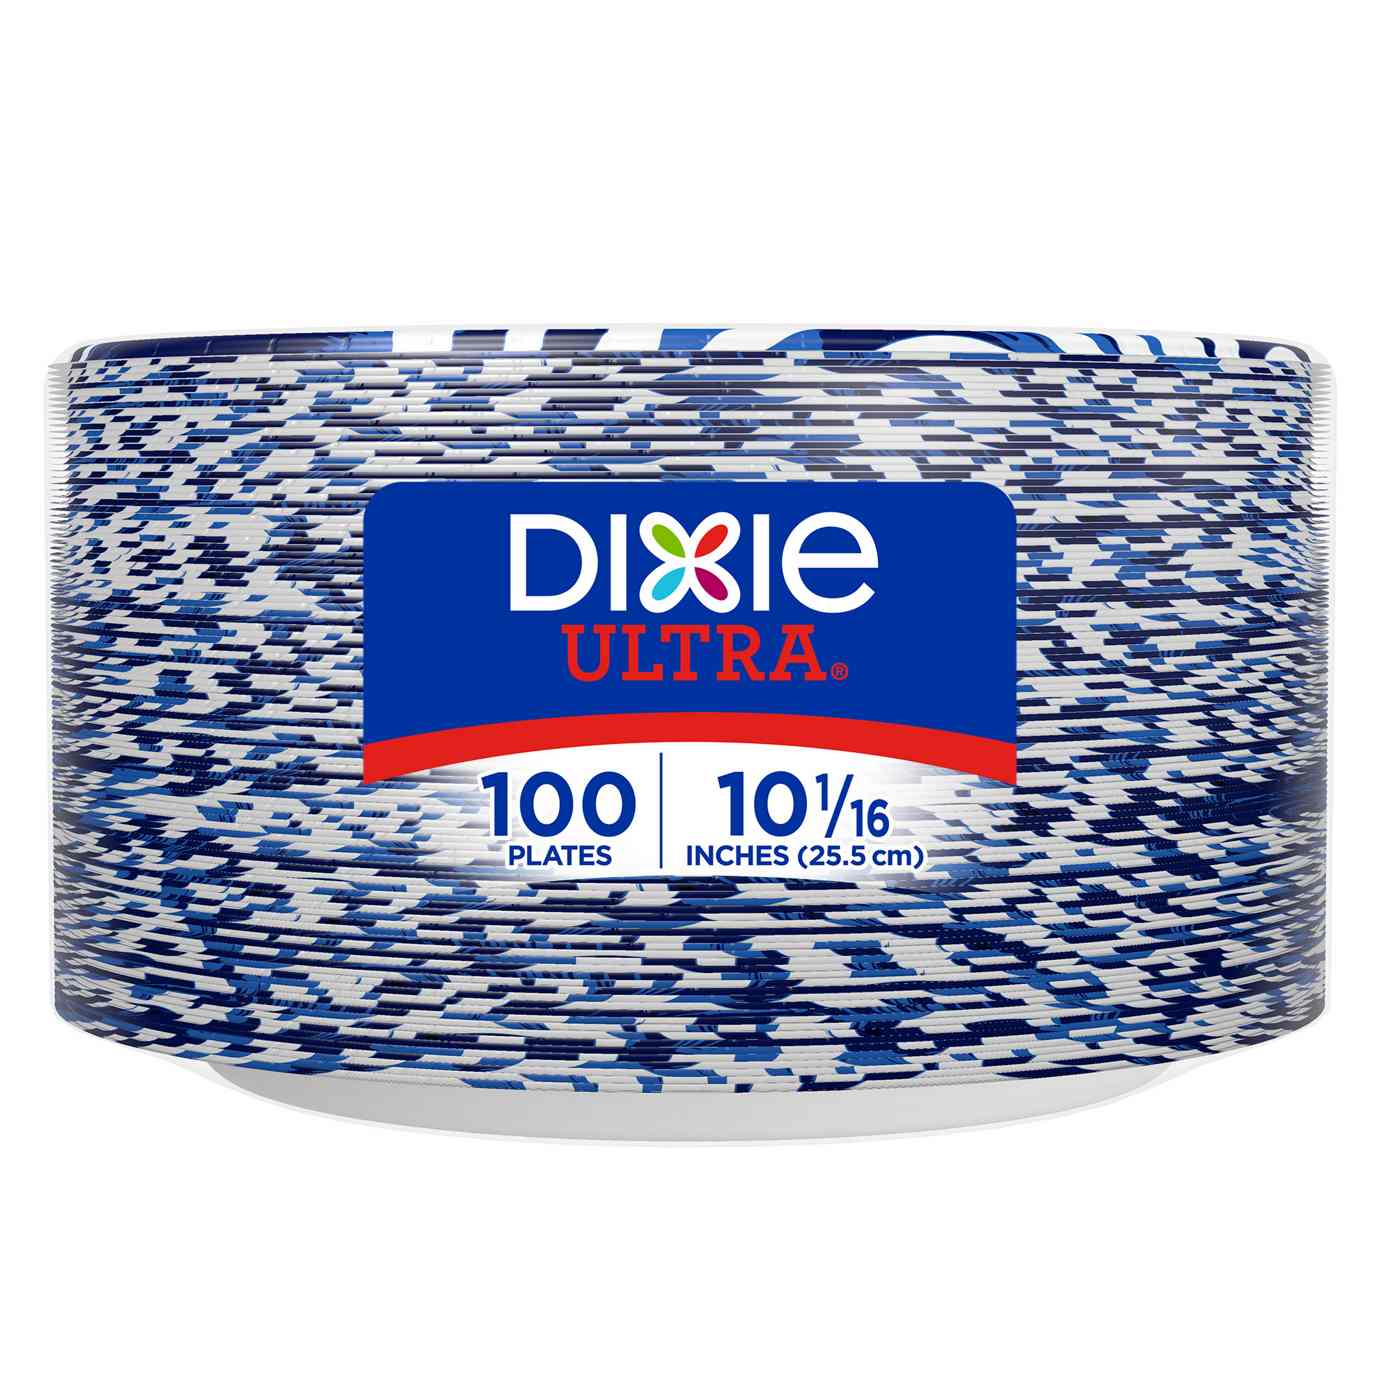 Dixie Ultra Printed 10 in Paper Plates; image 2 of 3